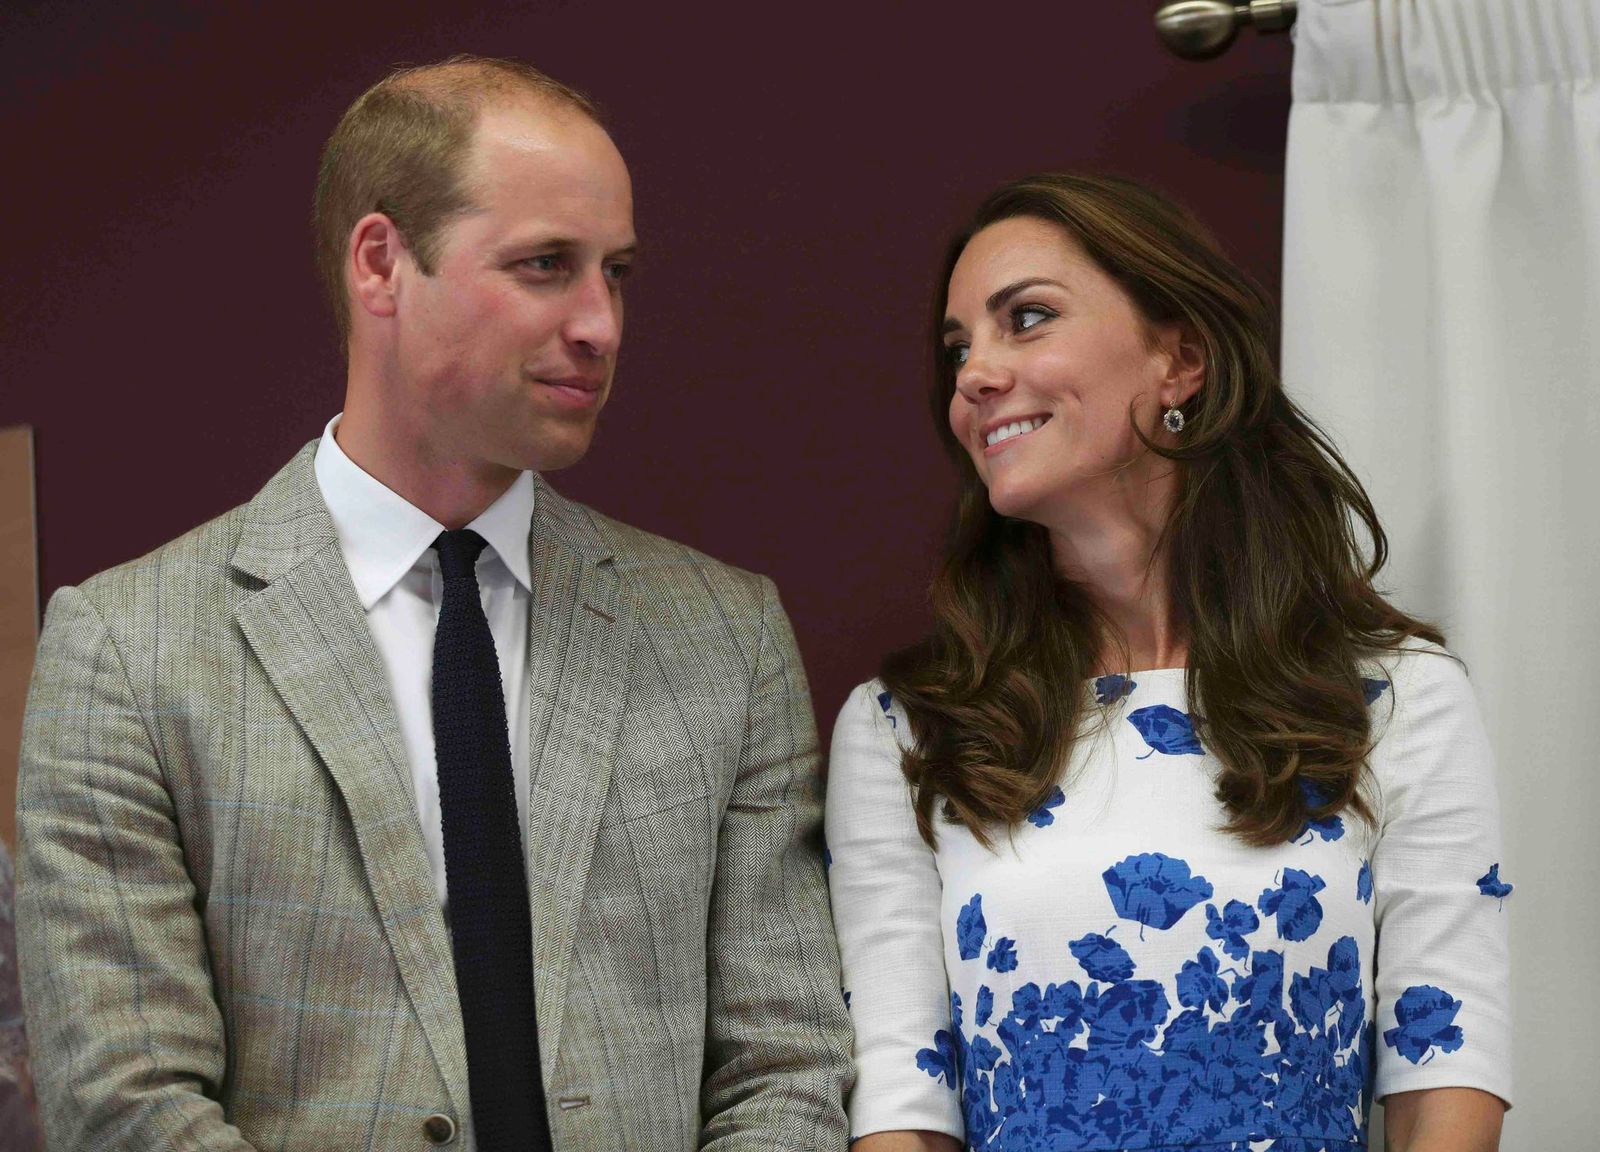 Kate Middleton and Prince Willaim listen to a speech during their visit to Keech Hospice Care on August 24, 2016. | Photo: Getty Images